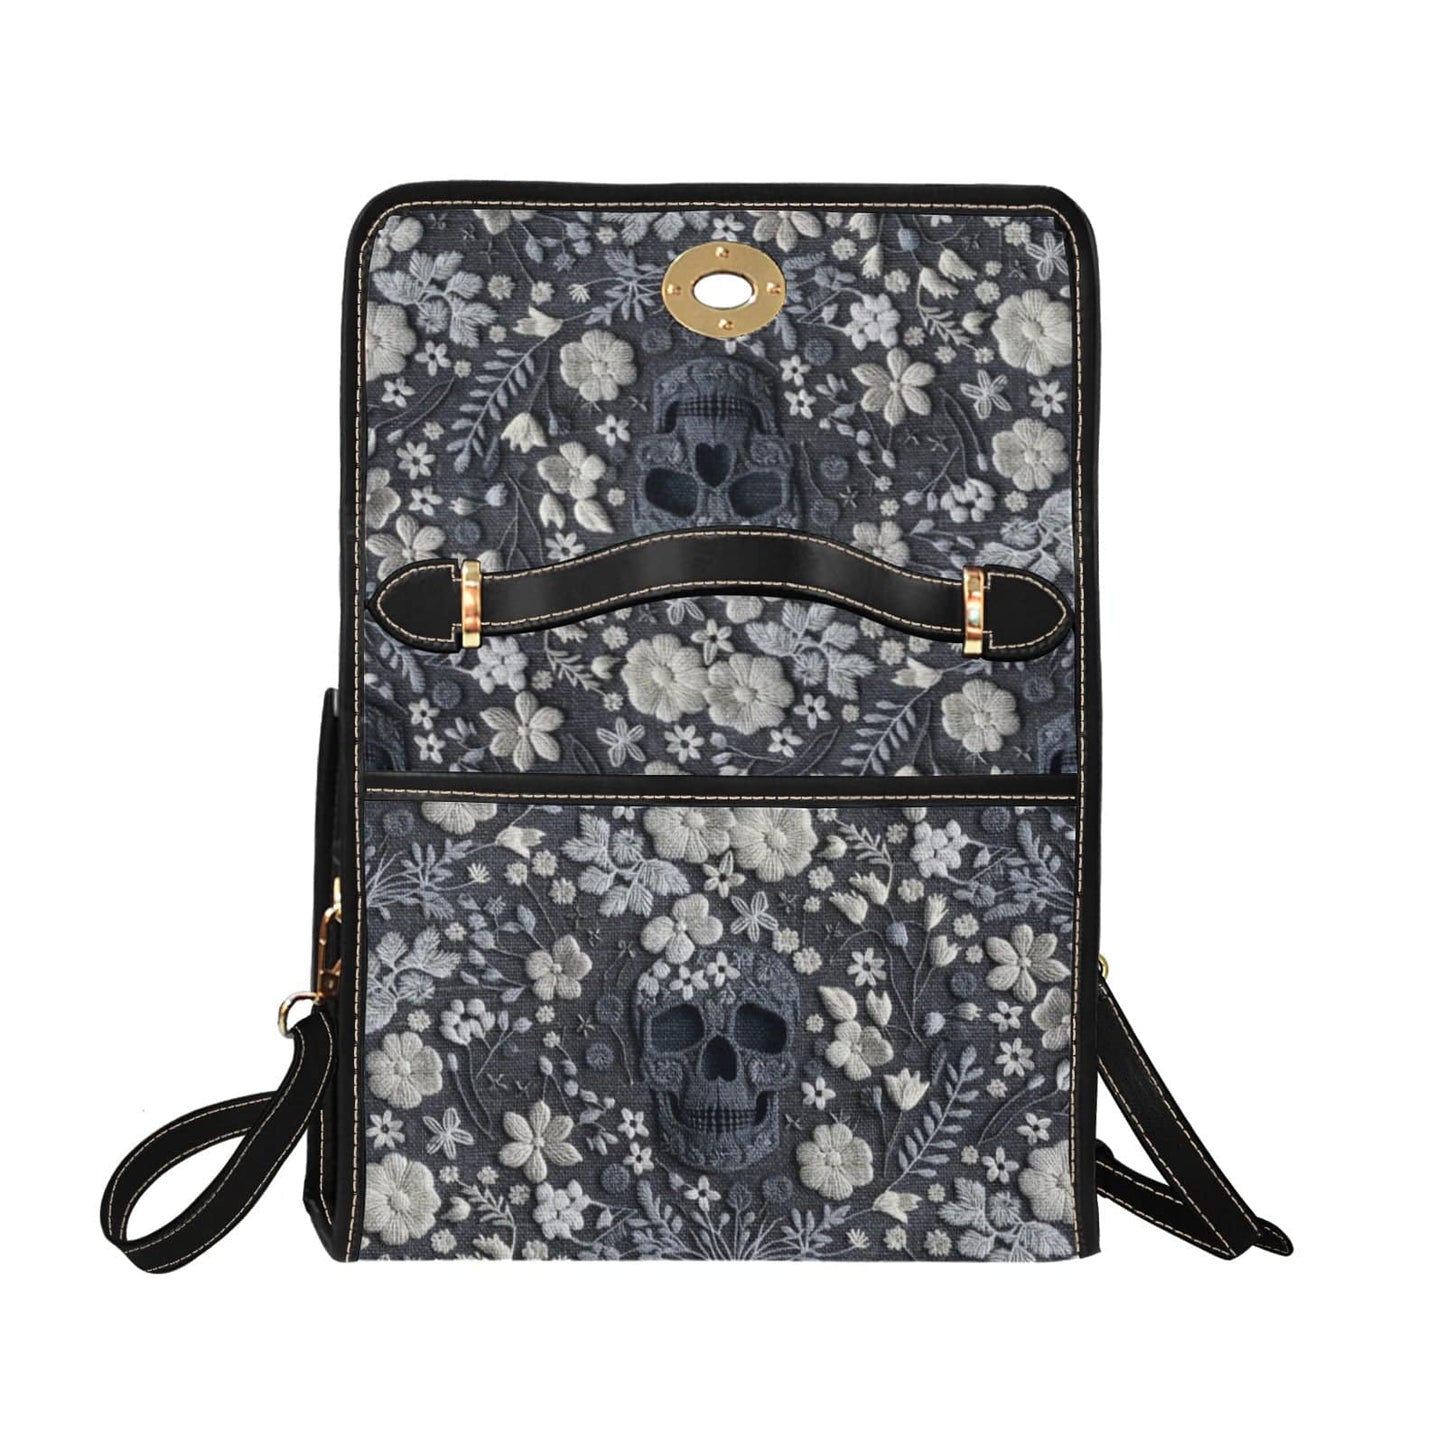 Skull Embroidery Style Canvas Bag with Black Trim